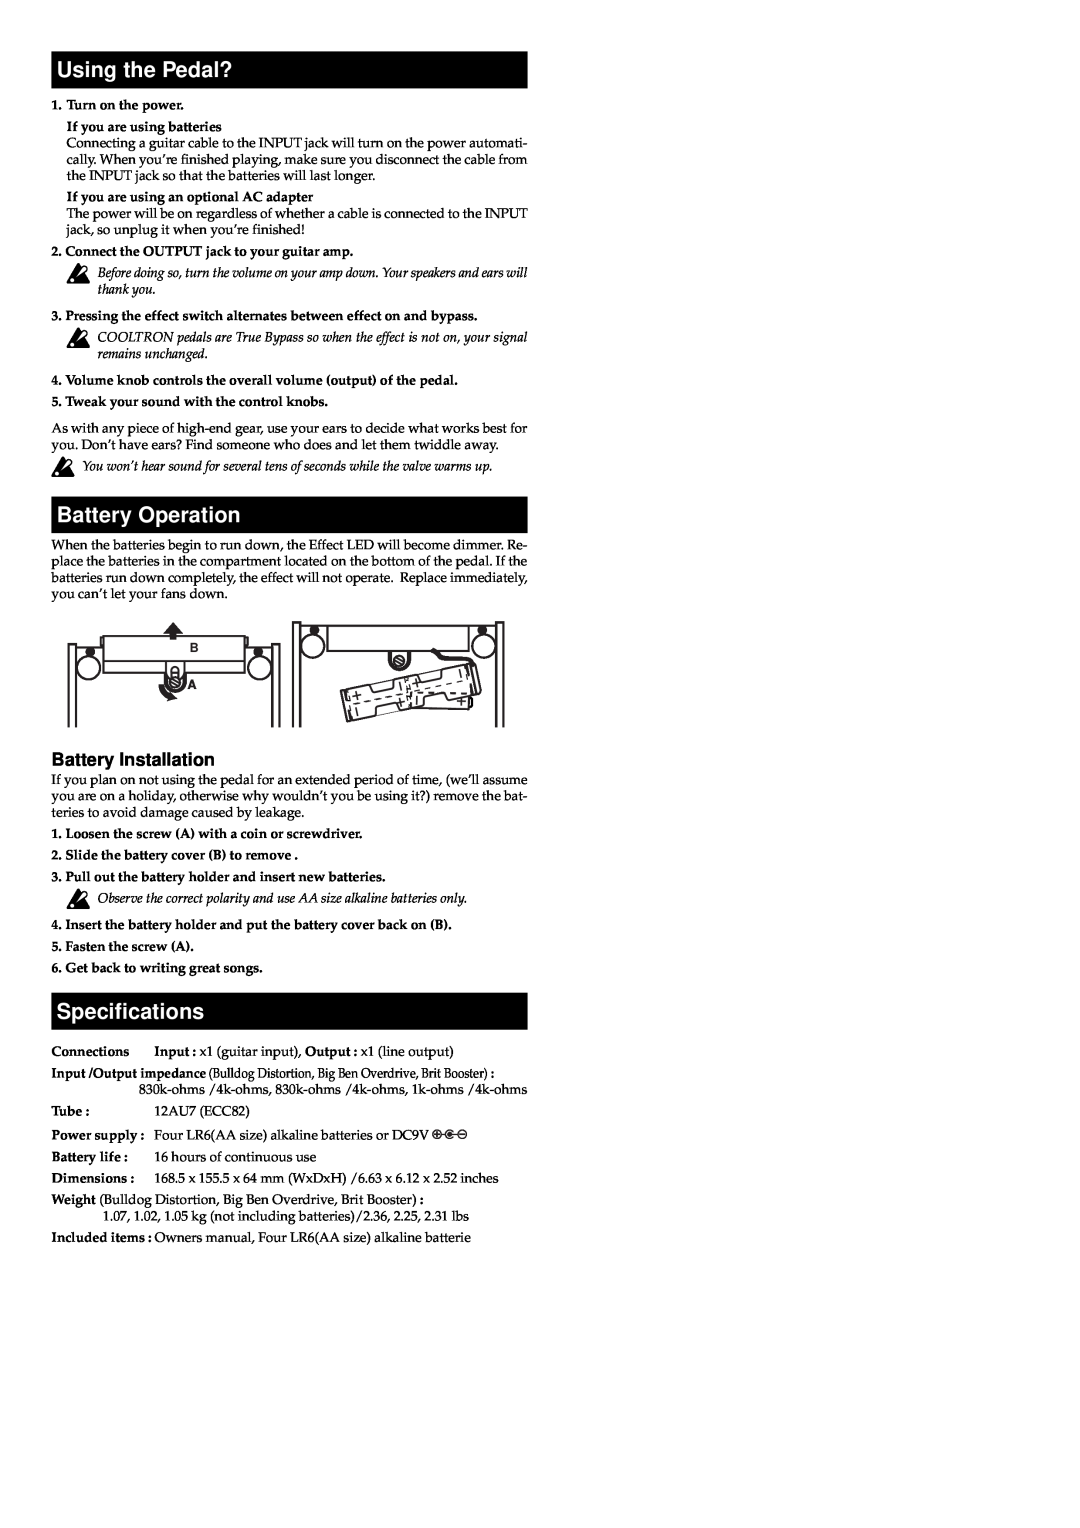 Vox Cooltron owner manual Using the Pedal?, Battery Operation, Specifications, Battery Installation 